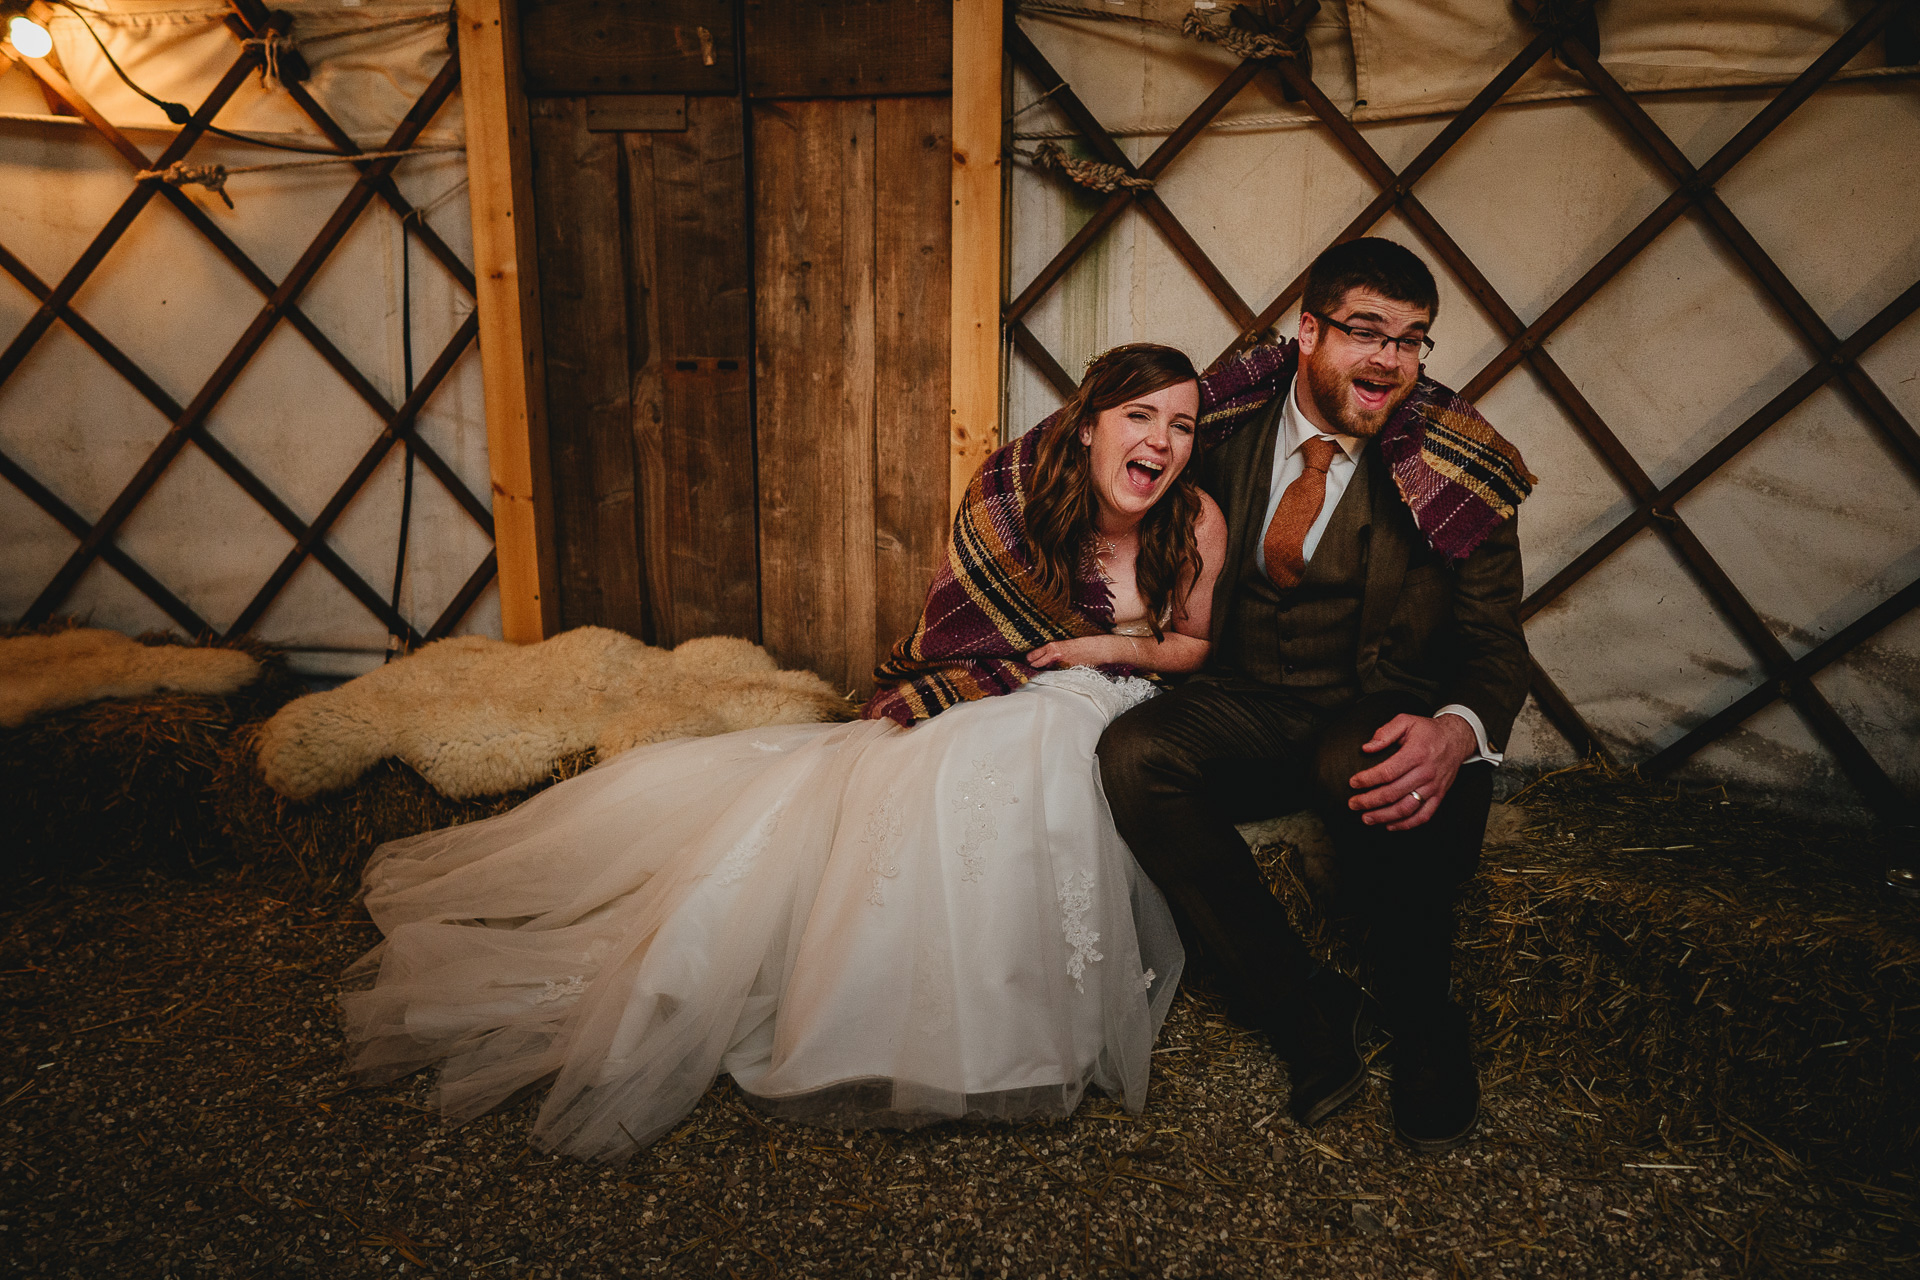 Bride and groom sitting on hay bales wrapped in a blanket laughing together